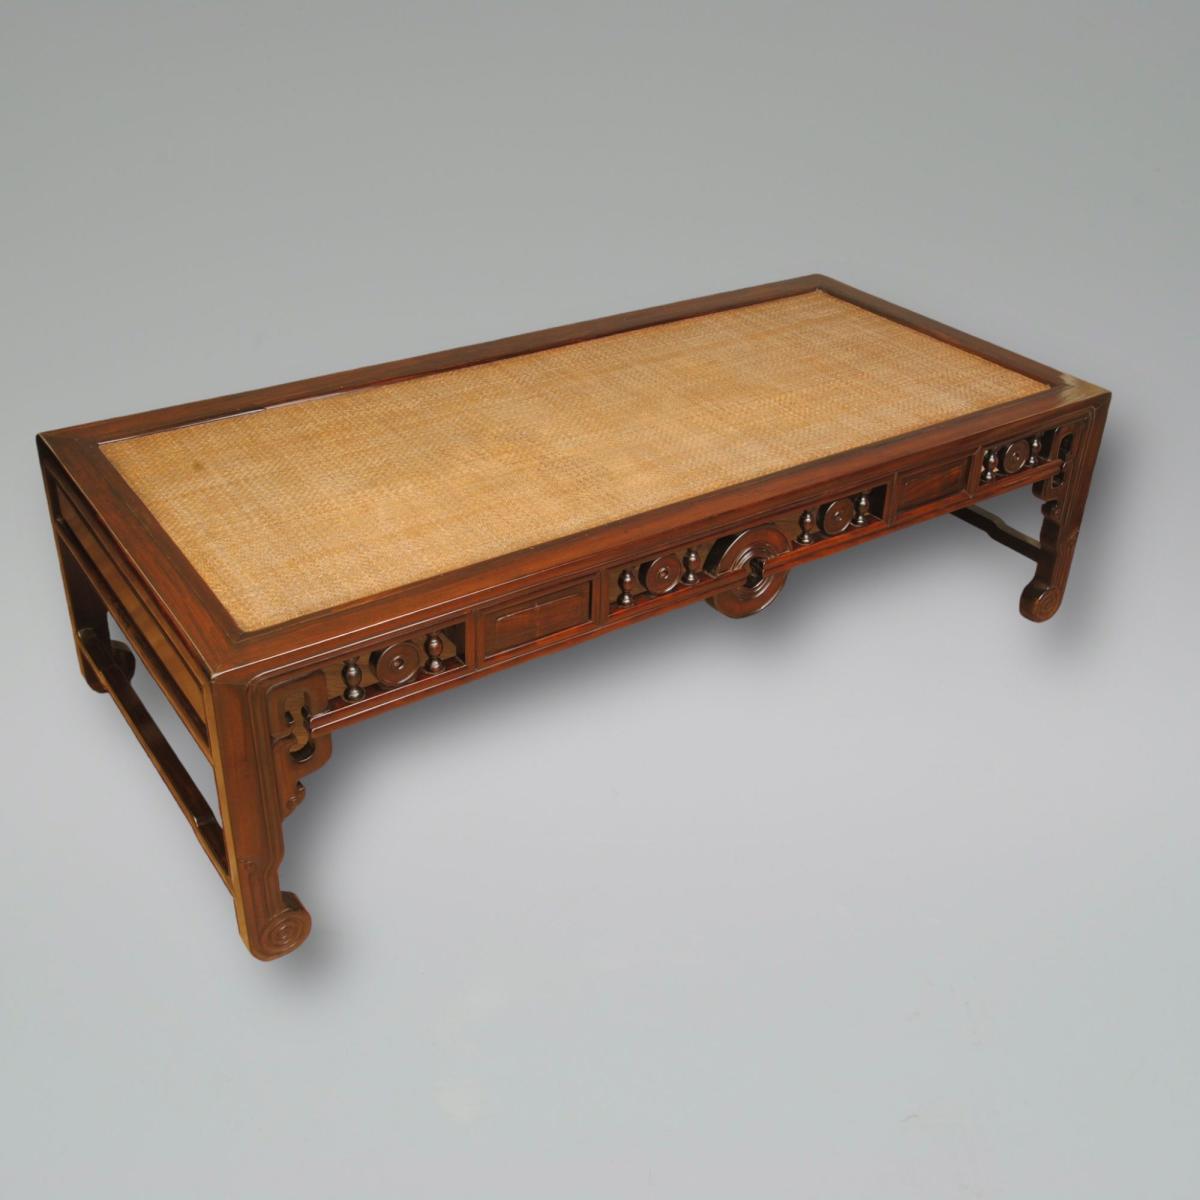 Chinese Hardwood Table or Daybed